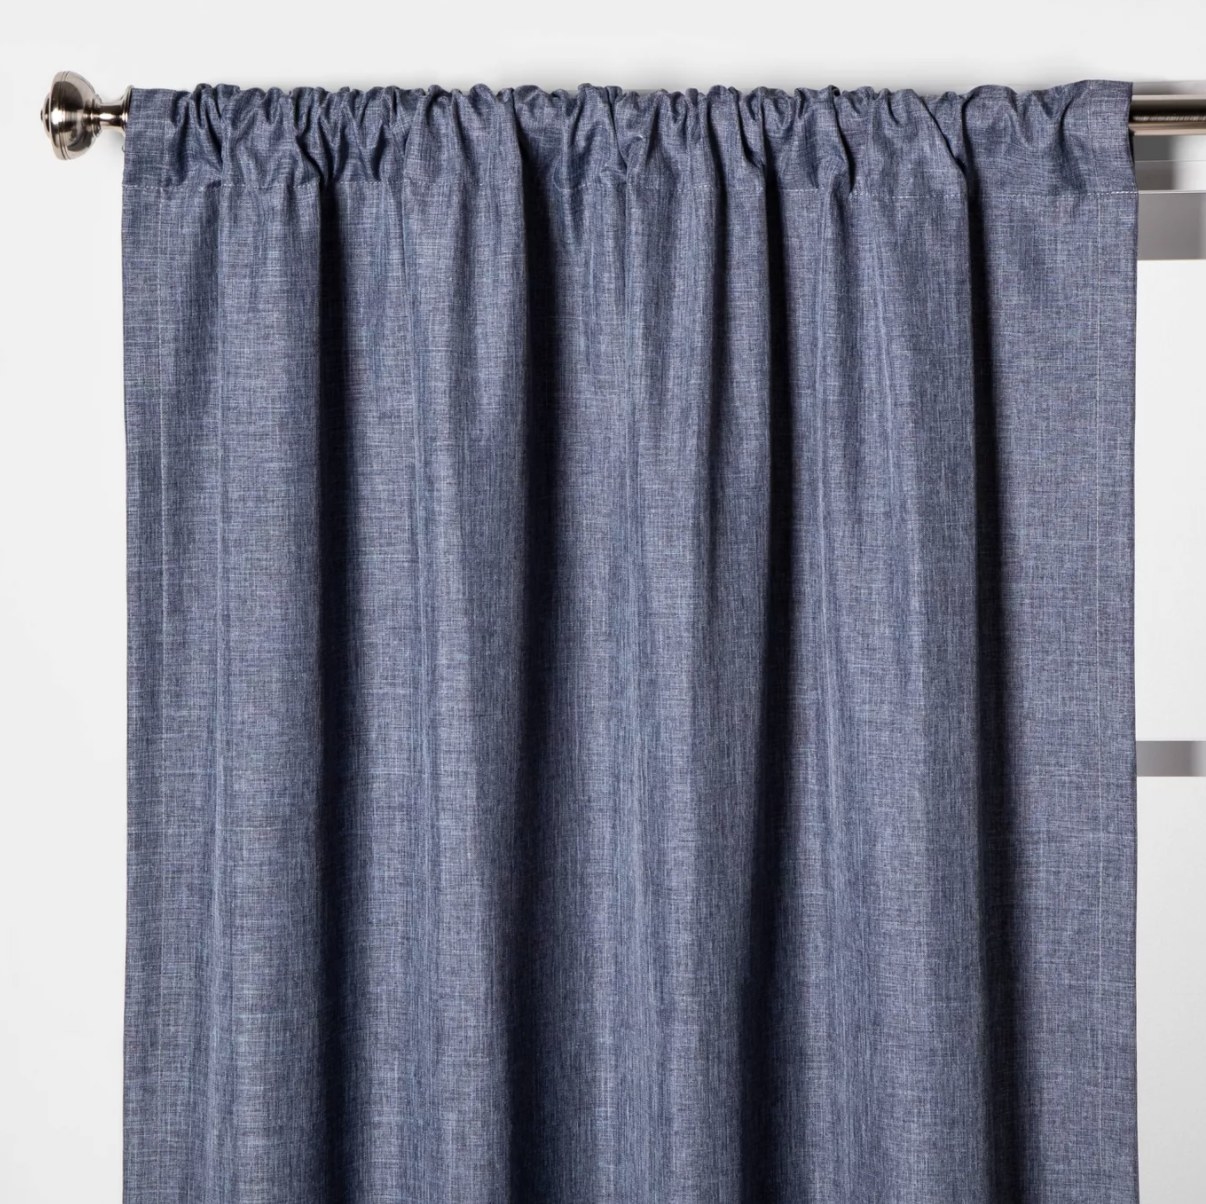 The chambray curtain